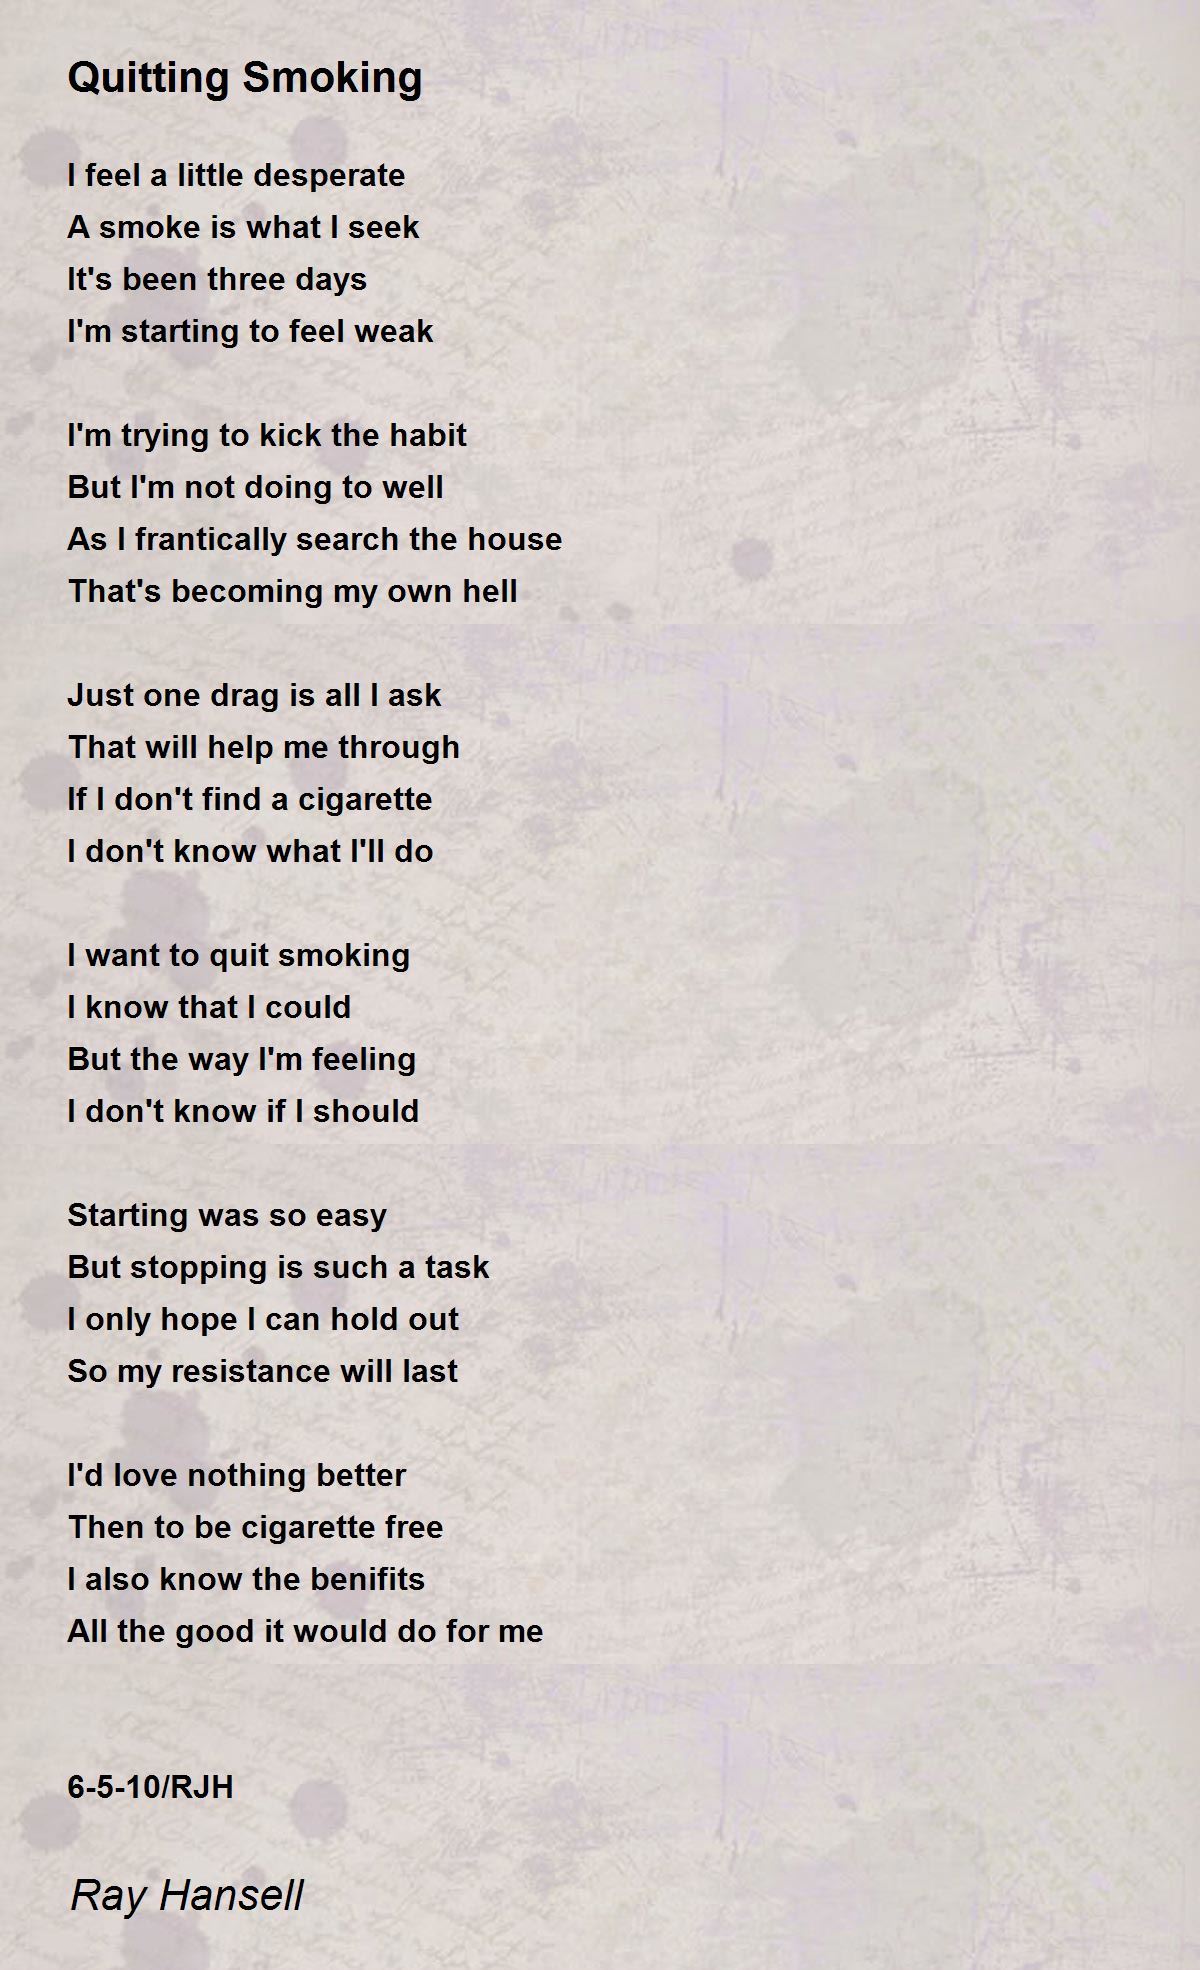 Quitting Smoking - Quitting Smoking Poem by Ray Hansell